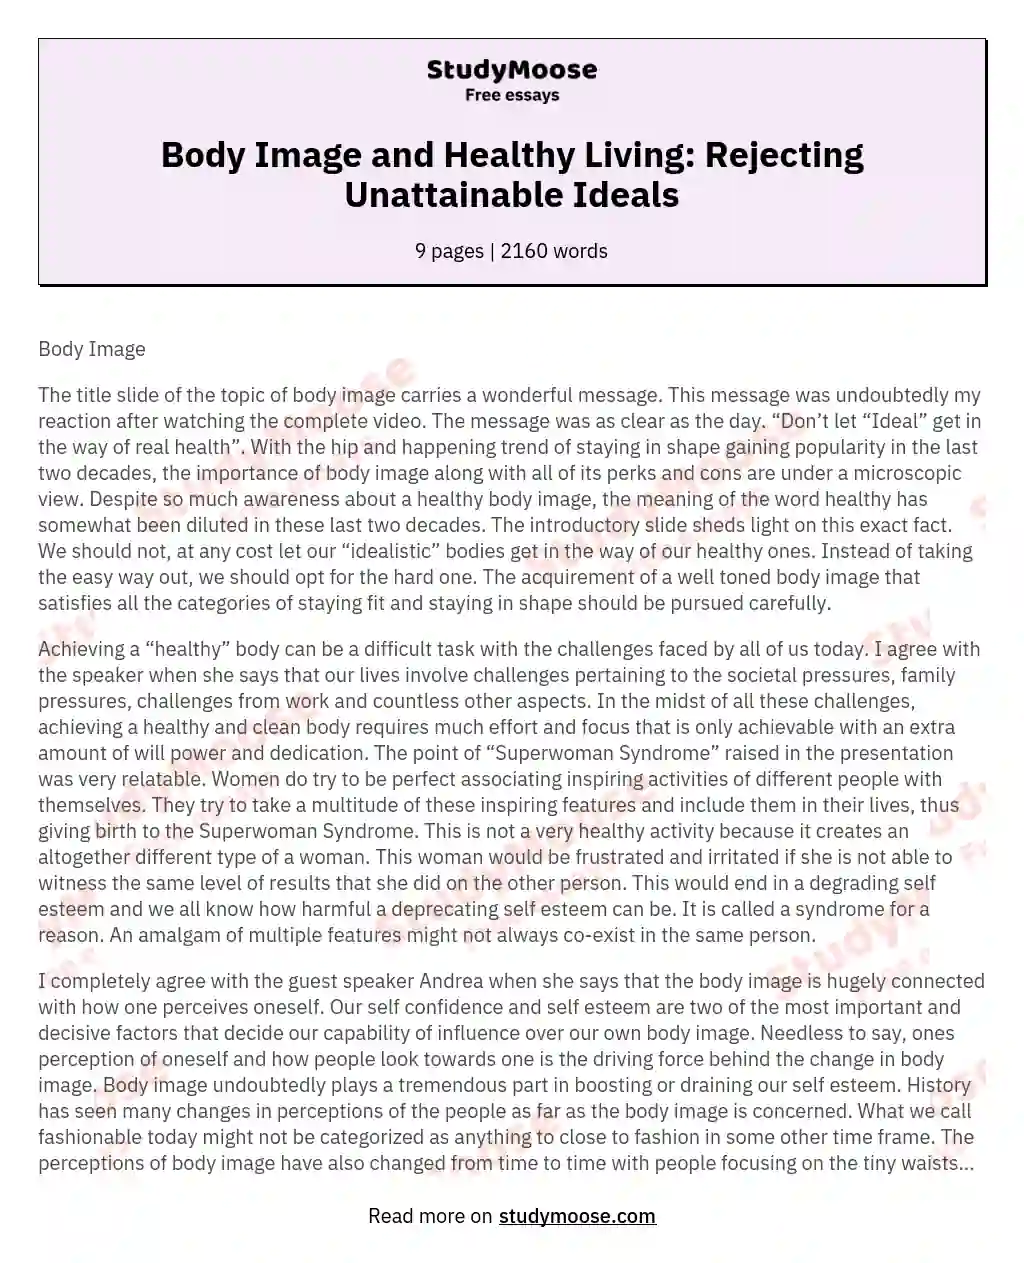 Body Image and Healthy Living: Rejecting Unattainable Ideals essay